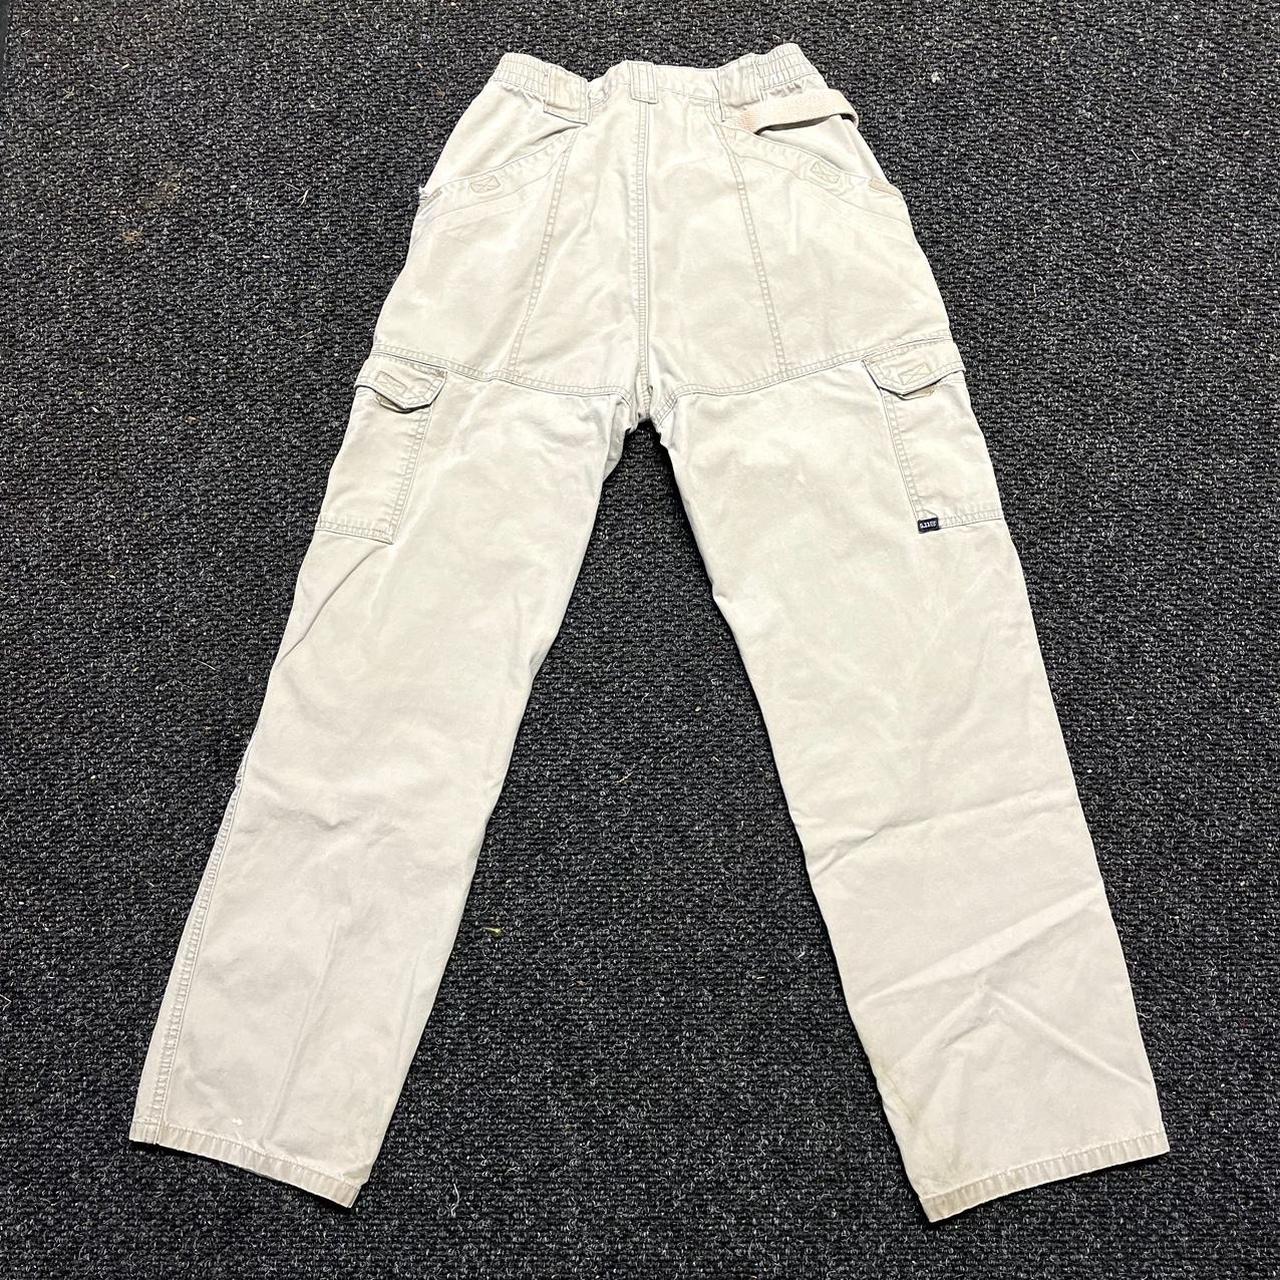 5.11 Tactical Men's Cream and Brown Trousers | Depop